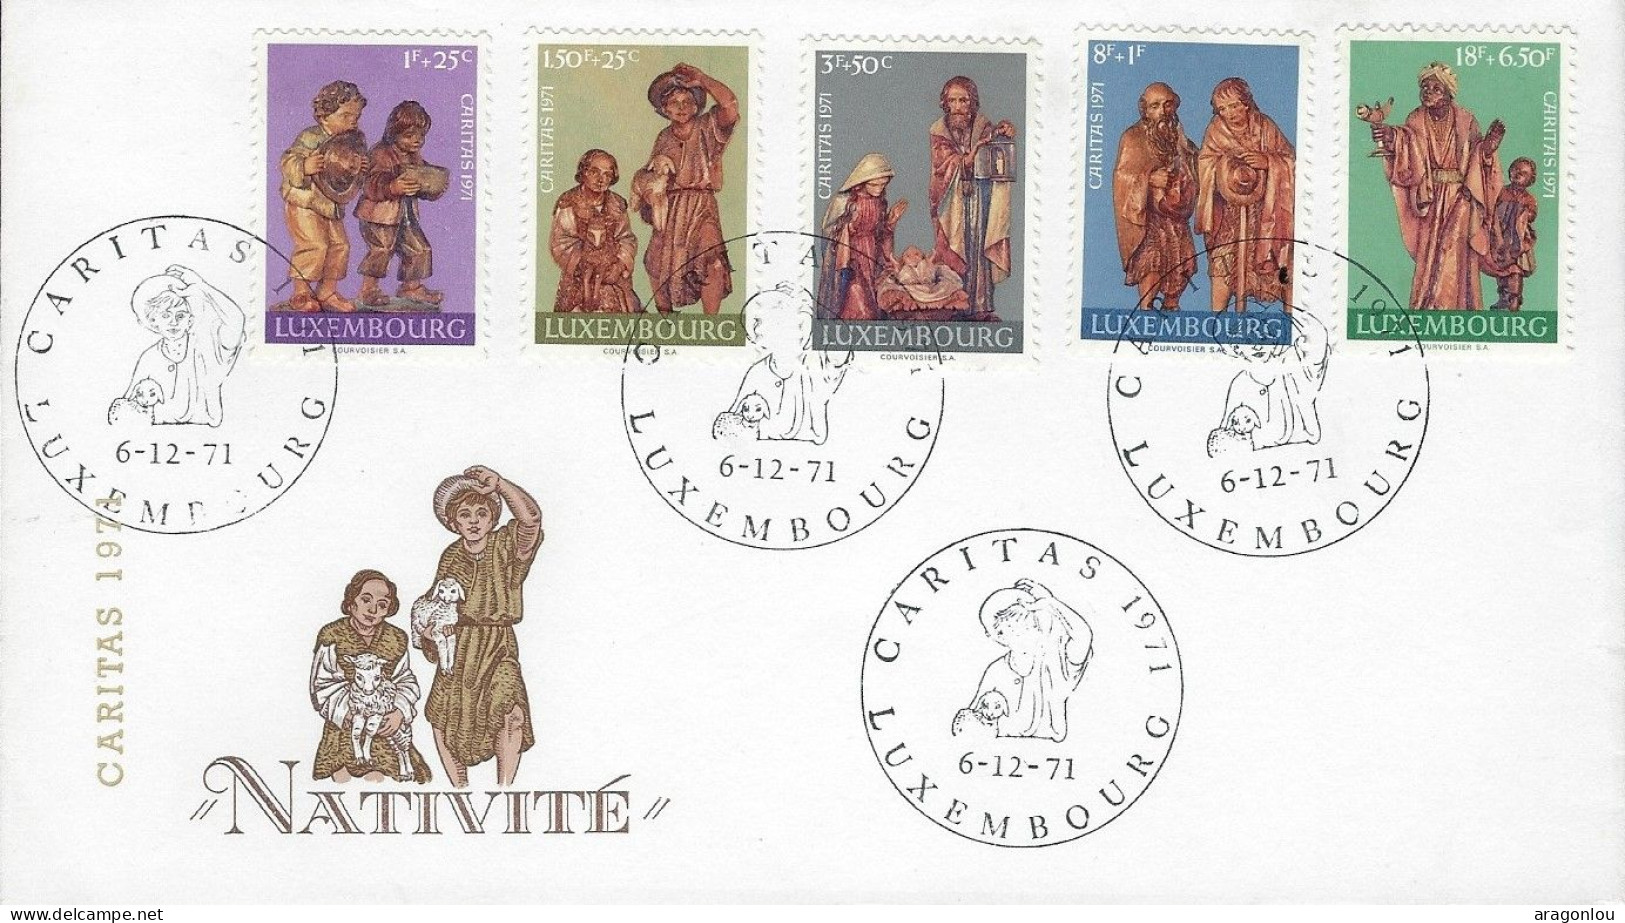 Luxembourg - Luxemburg -  Enveloppe  1971      Caritas   NATIVITÉ - Used Stamps